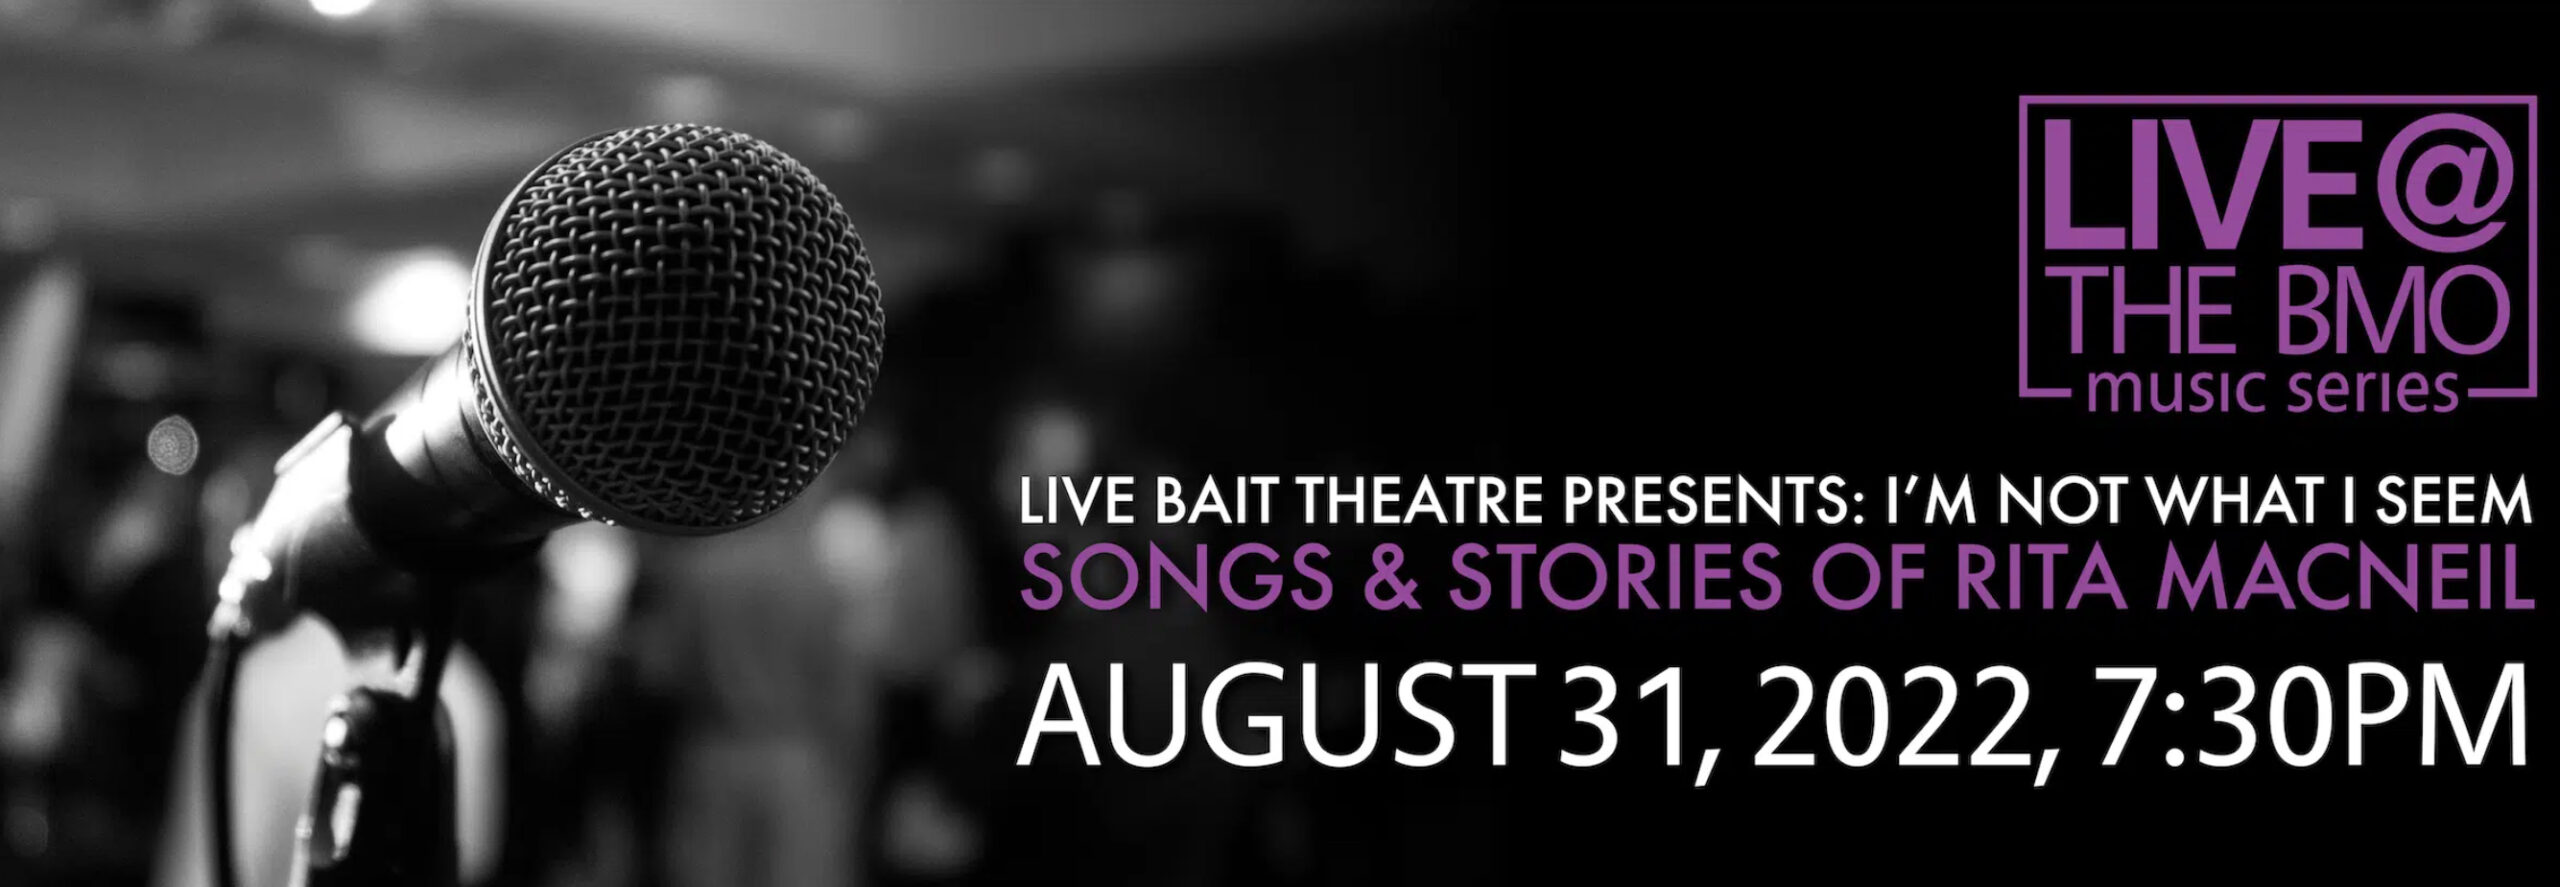 Image of a microphone. Image reads Live at the BMO. Live Bait Theatre presents I'm not What I Seem, songs and stories of Rita MacNeil. August 31, 2022, 7:30pm.